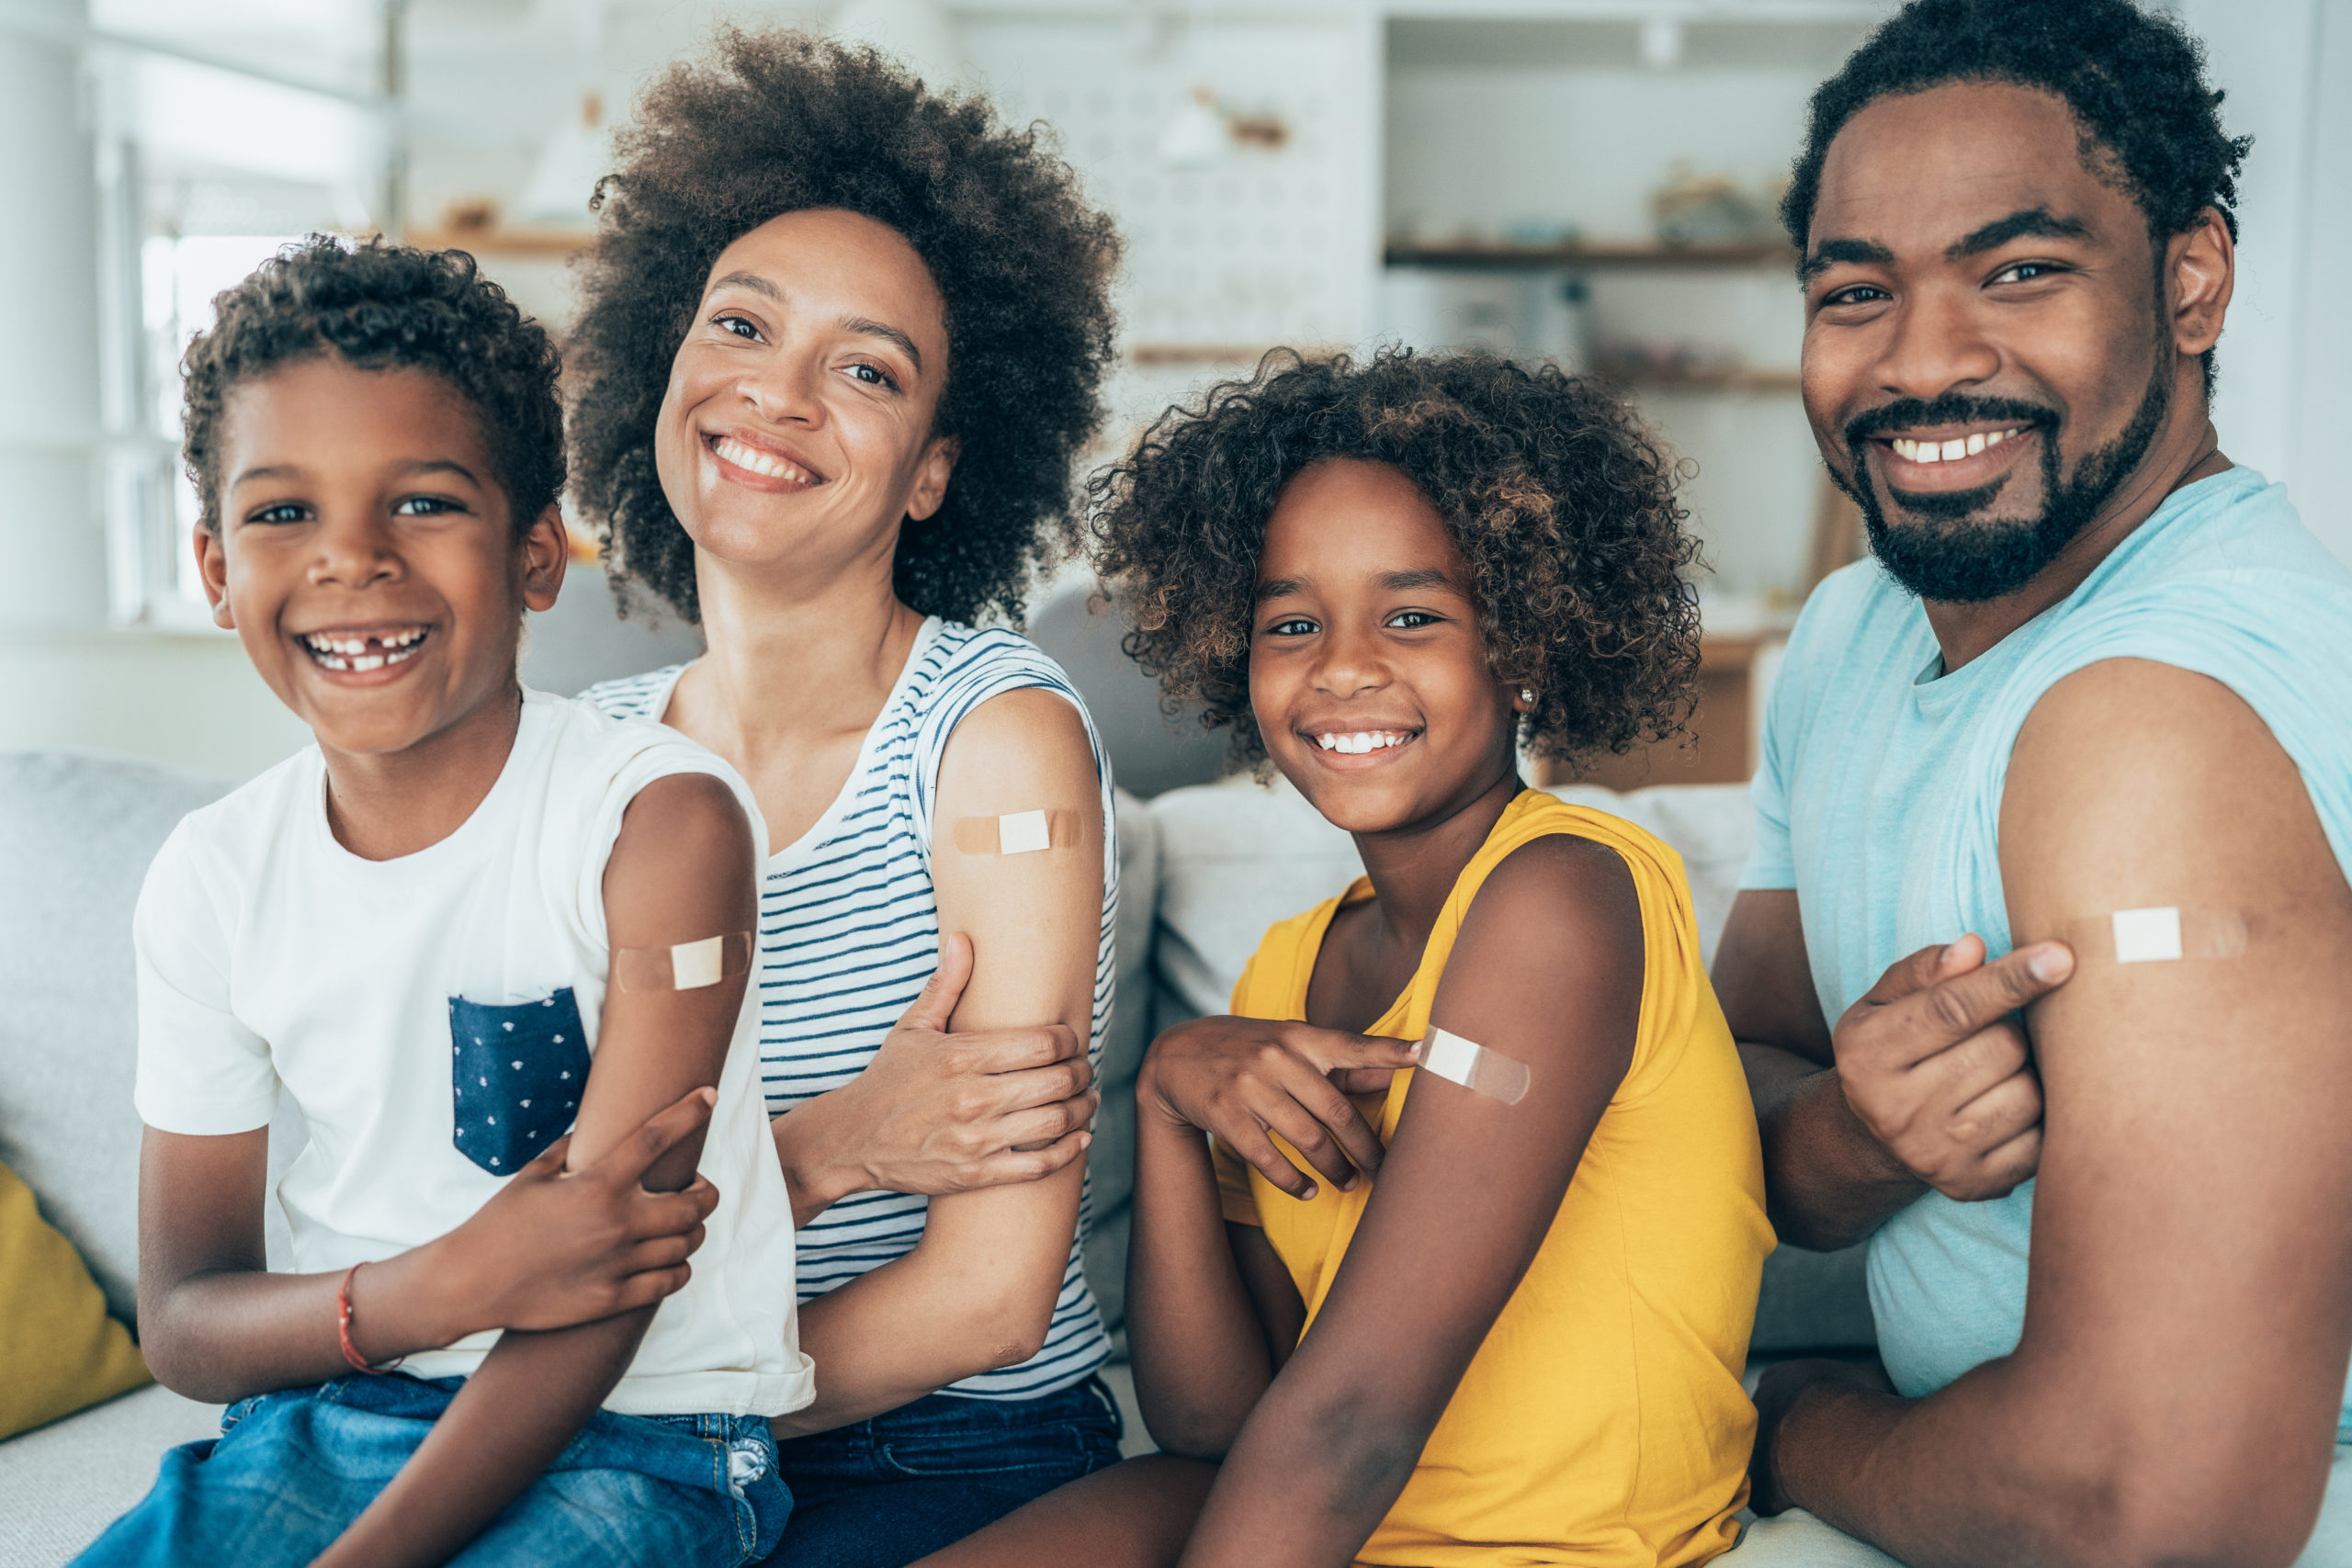  Portrait of a Black family, smiling and displaying the band-aids on their arms, after getting a vaccination.